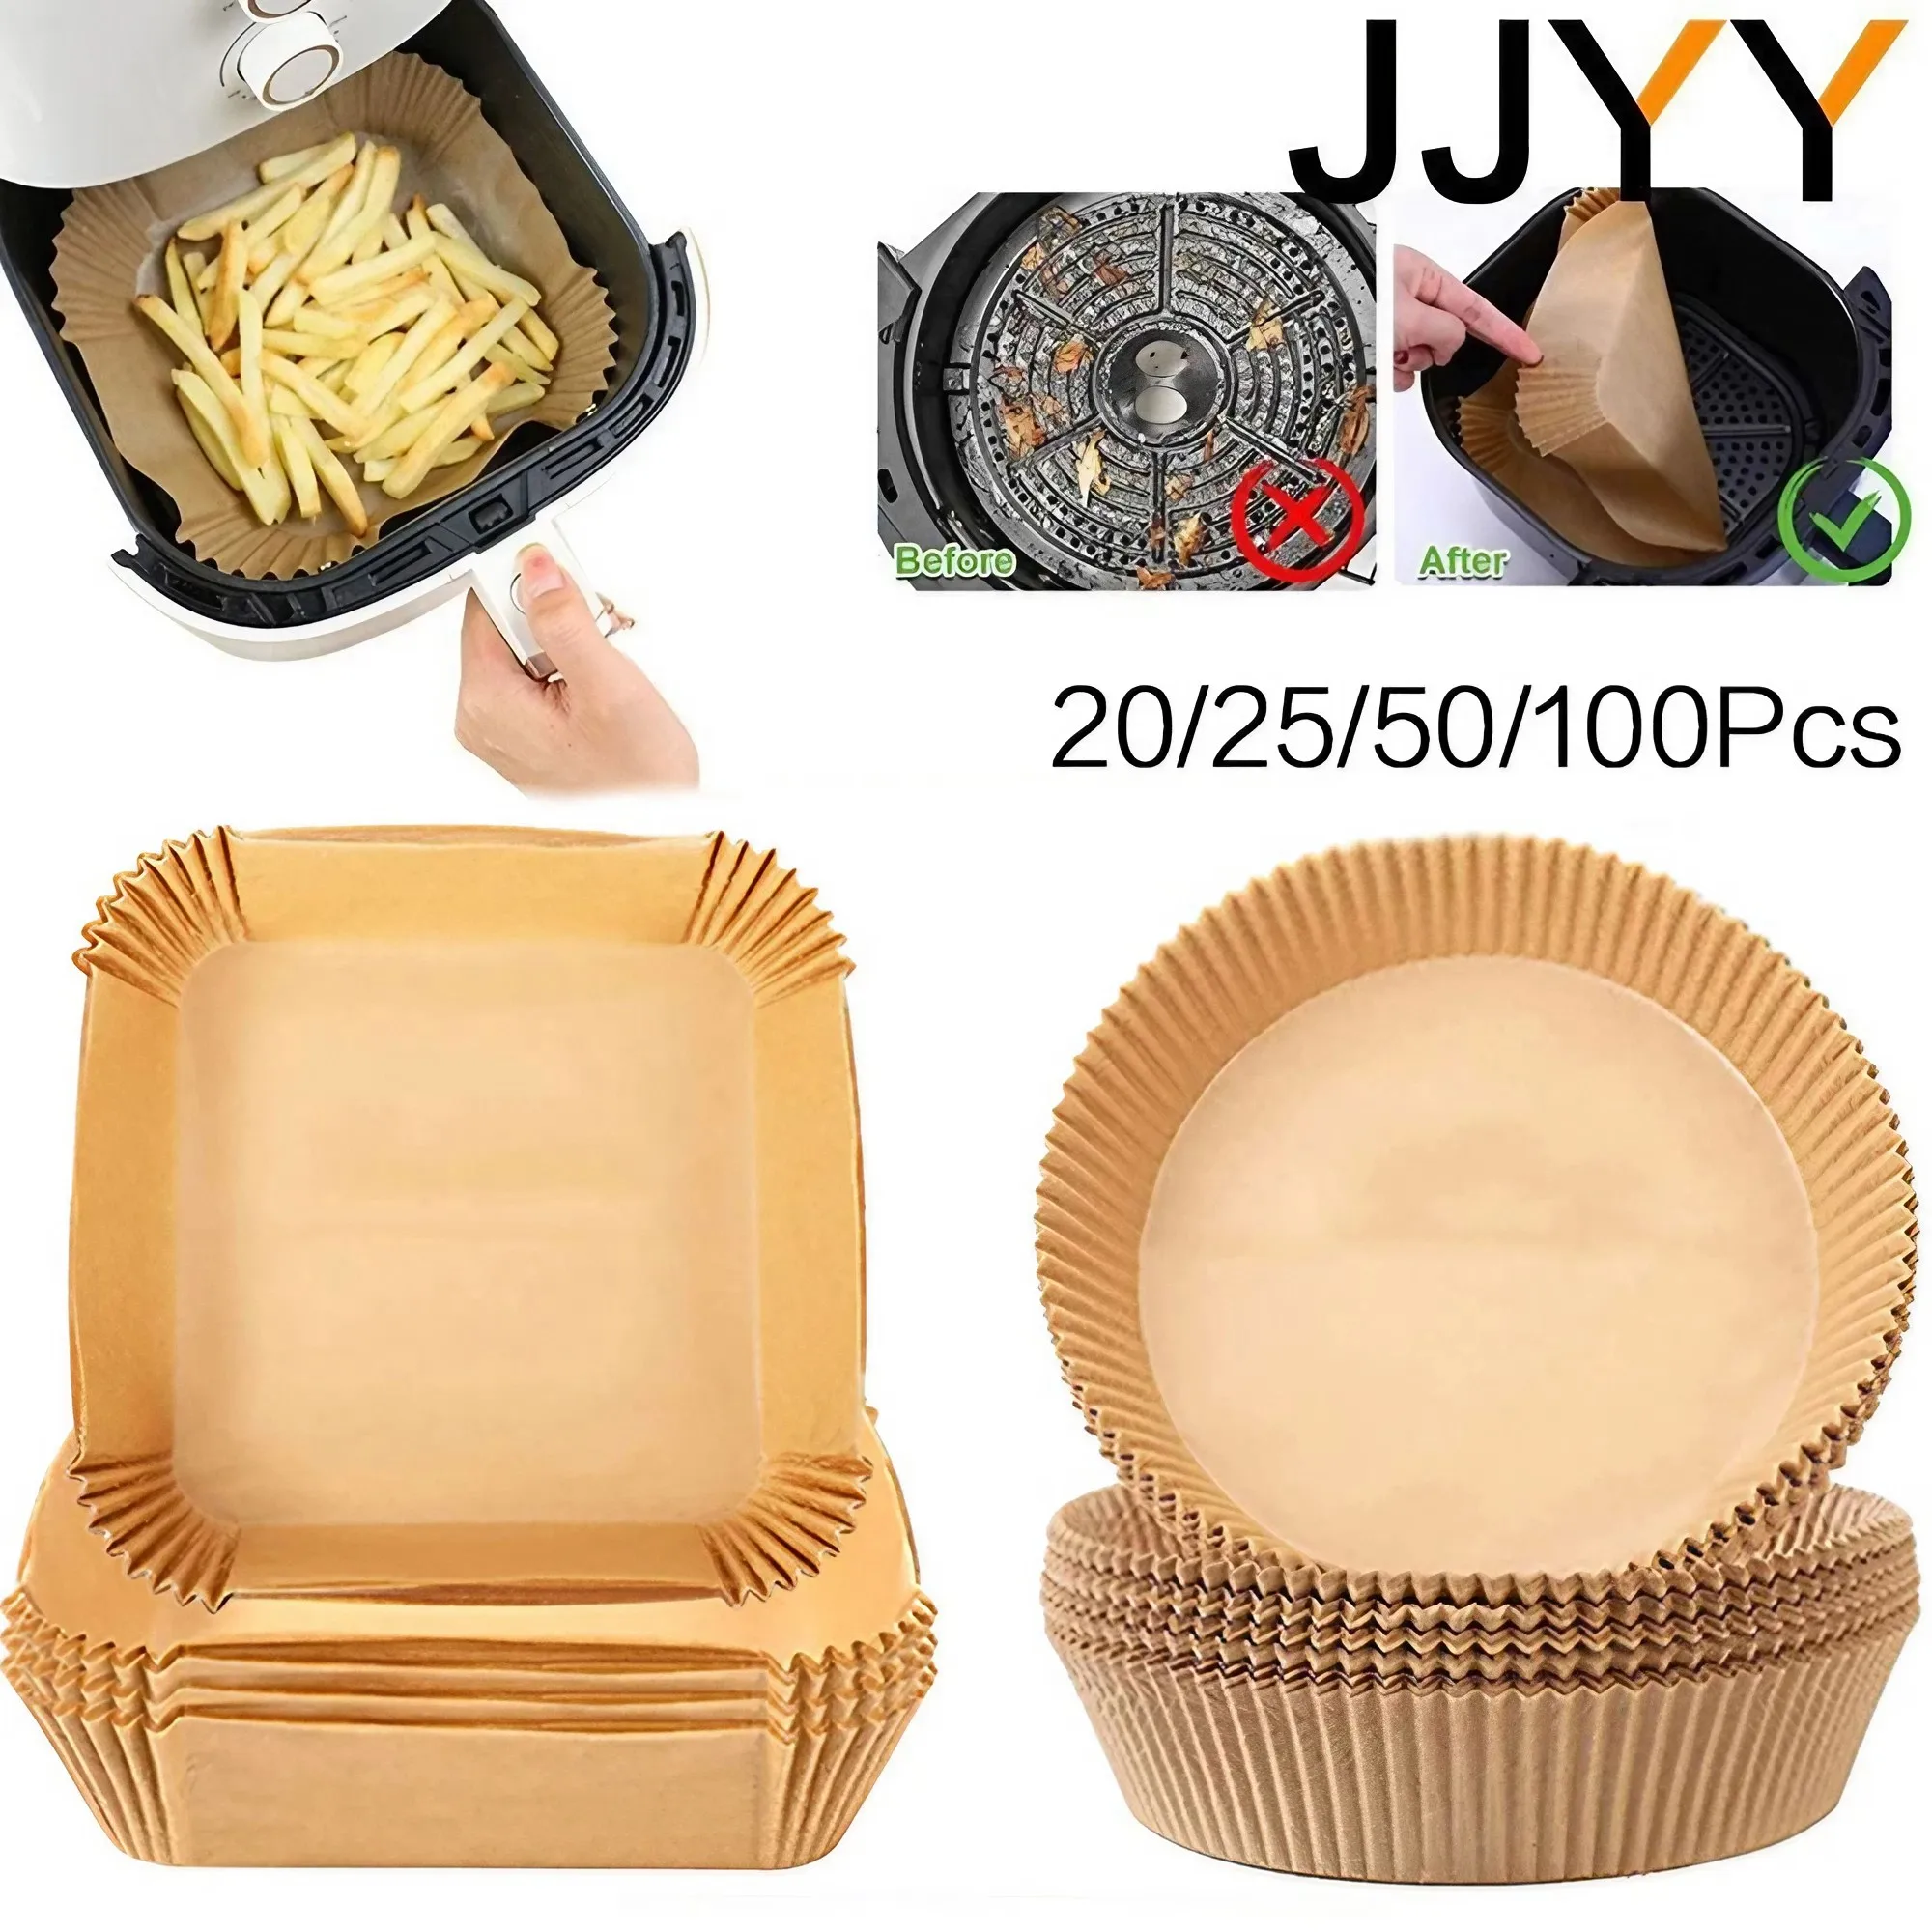 https://ae01.alicdn.com/kf/S60b5c7782889425ab756e22c7af82ec1U/JJYY-Air-Fryer-Disposable-Paper-Non-Stick-Airfryer-Baking-Papers-Round-Air-Fryer-Paper-Liners-Paper.jpg